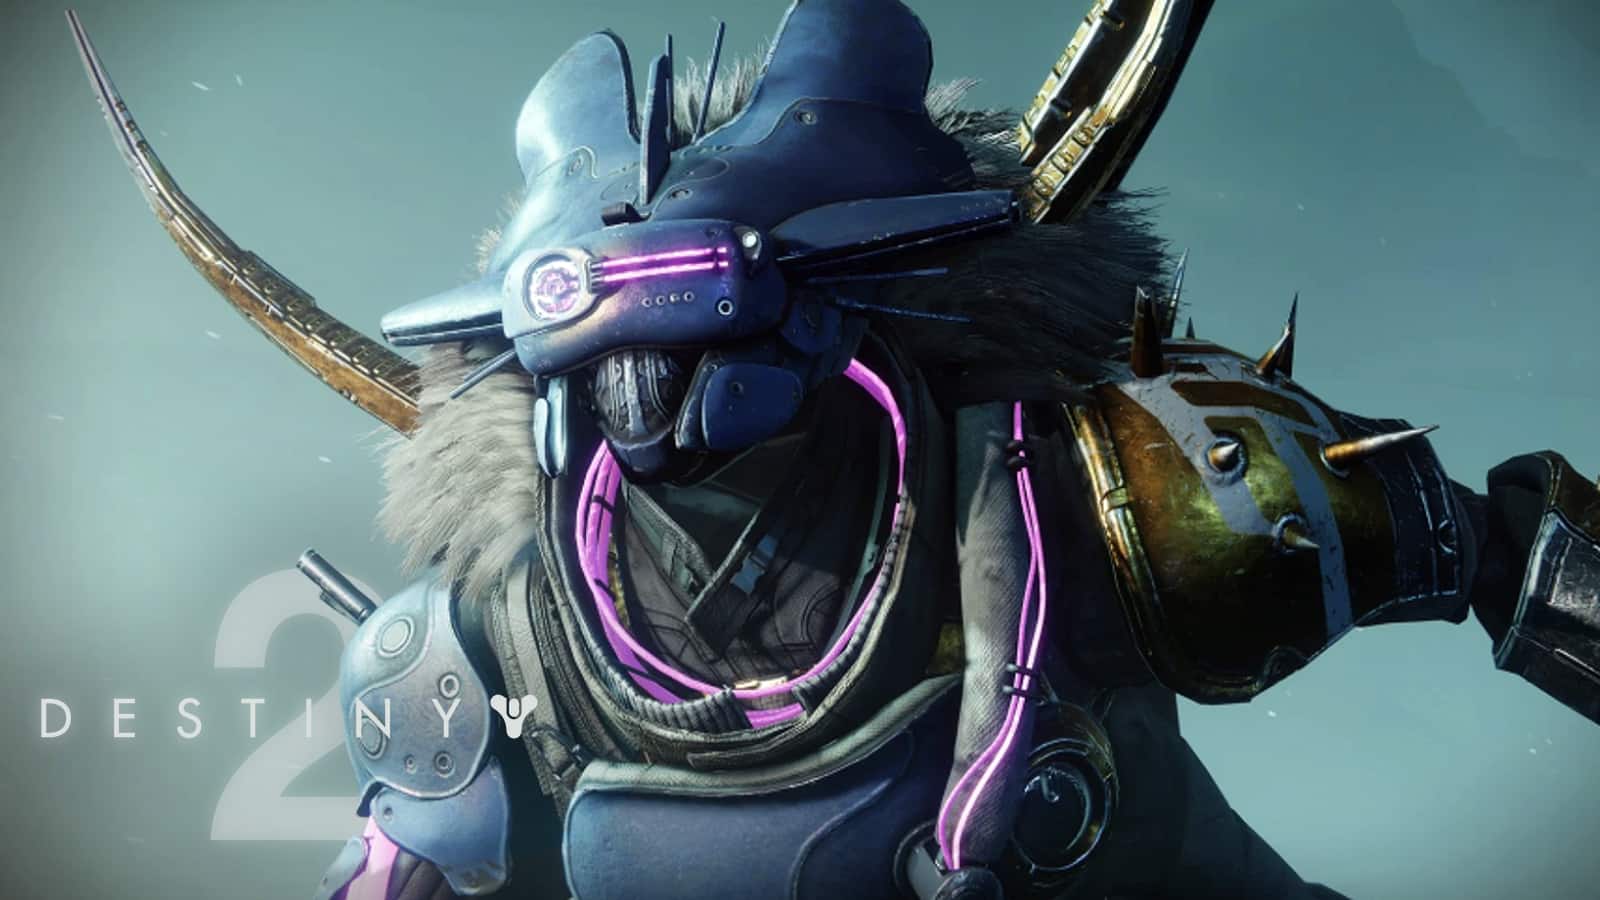 Bungie accidentally Destiny 2 crossplay enabled.